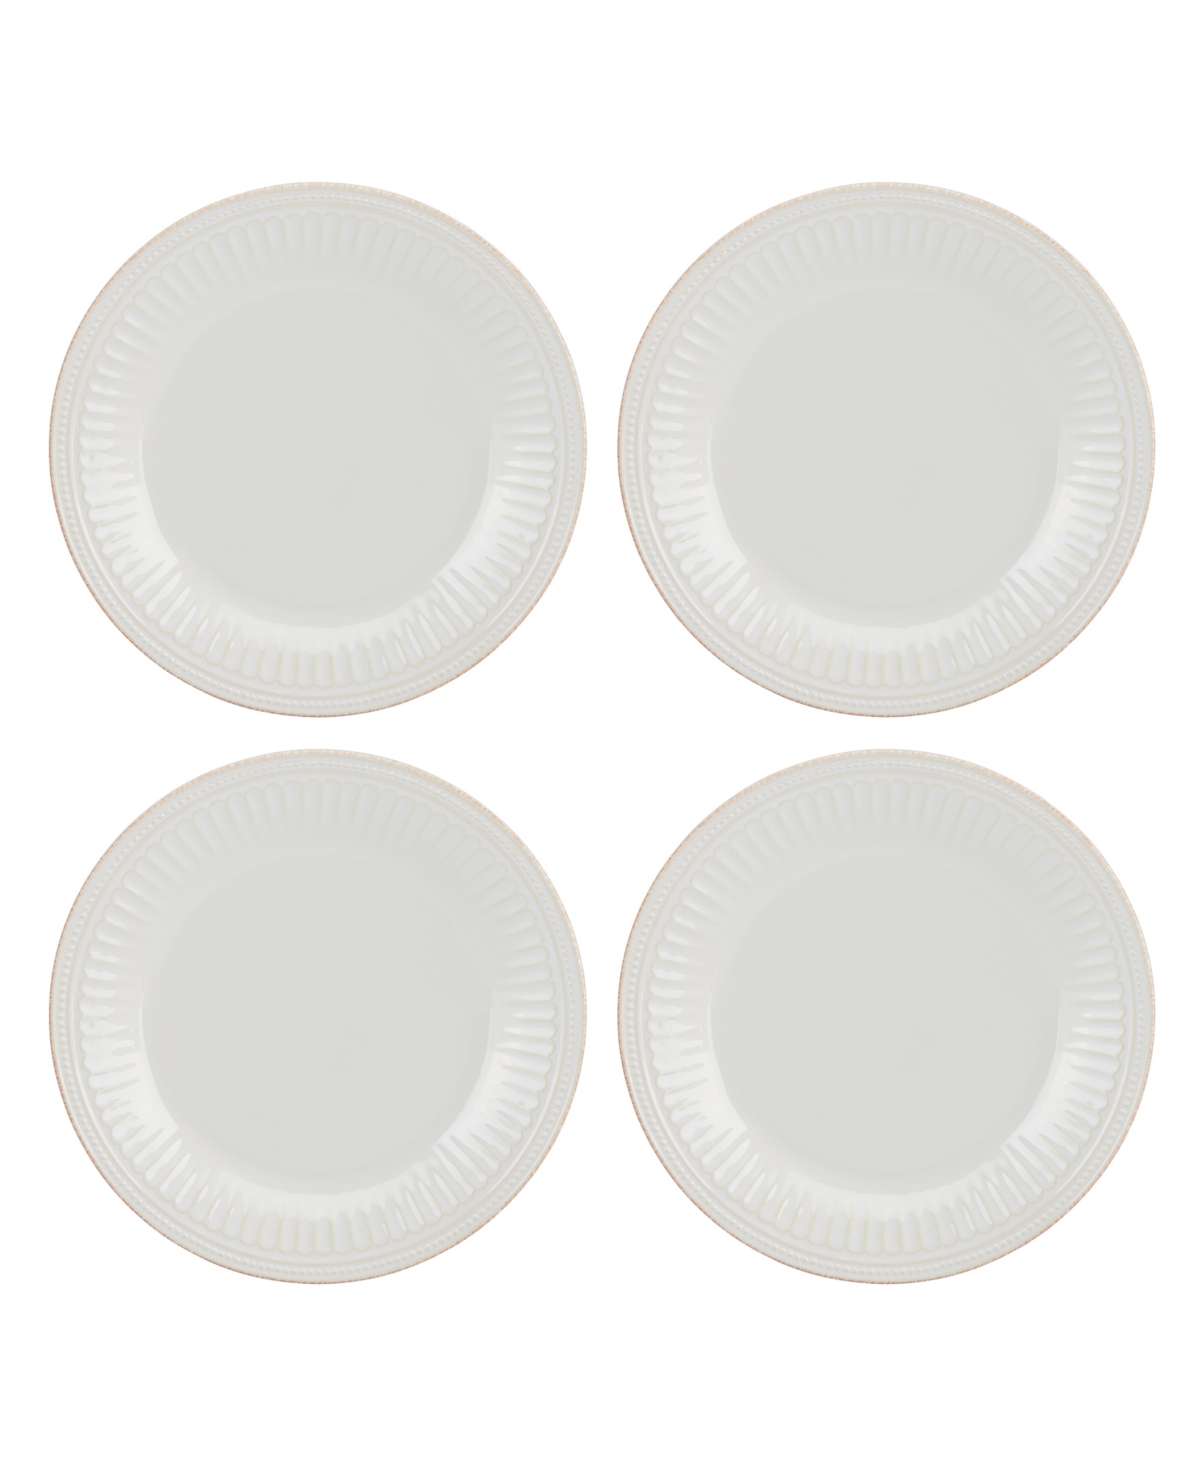 French Perle Groove Dinner Plates, Set Of 4 - White